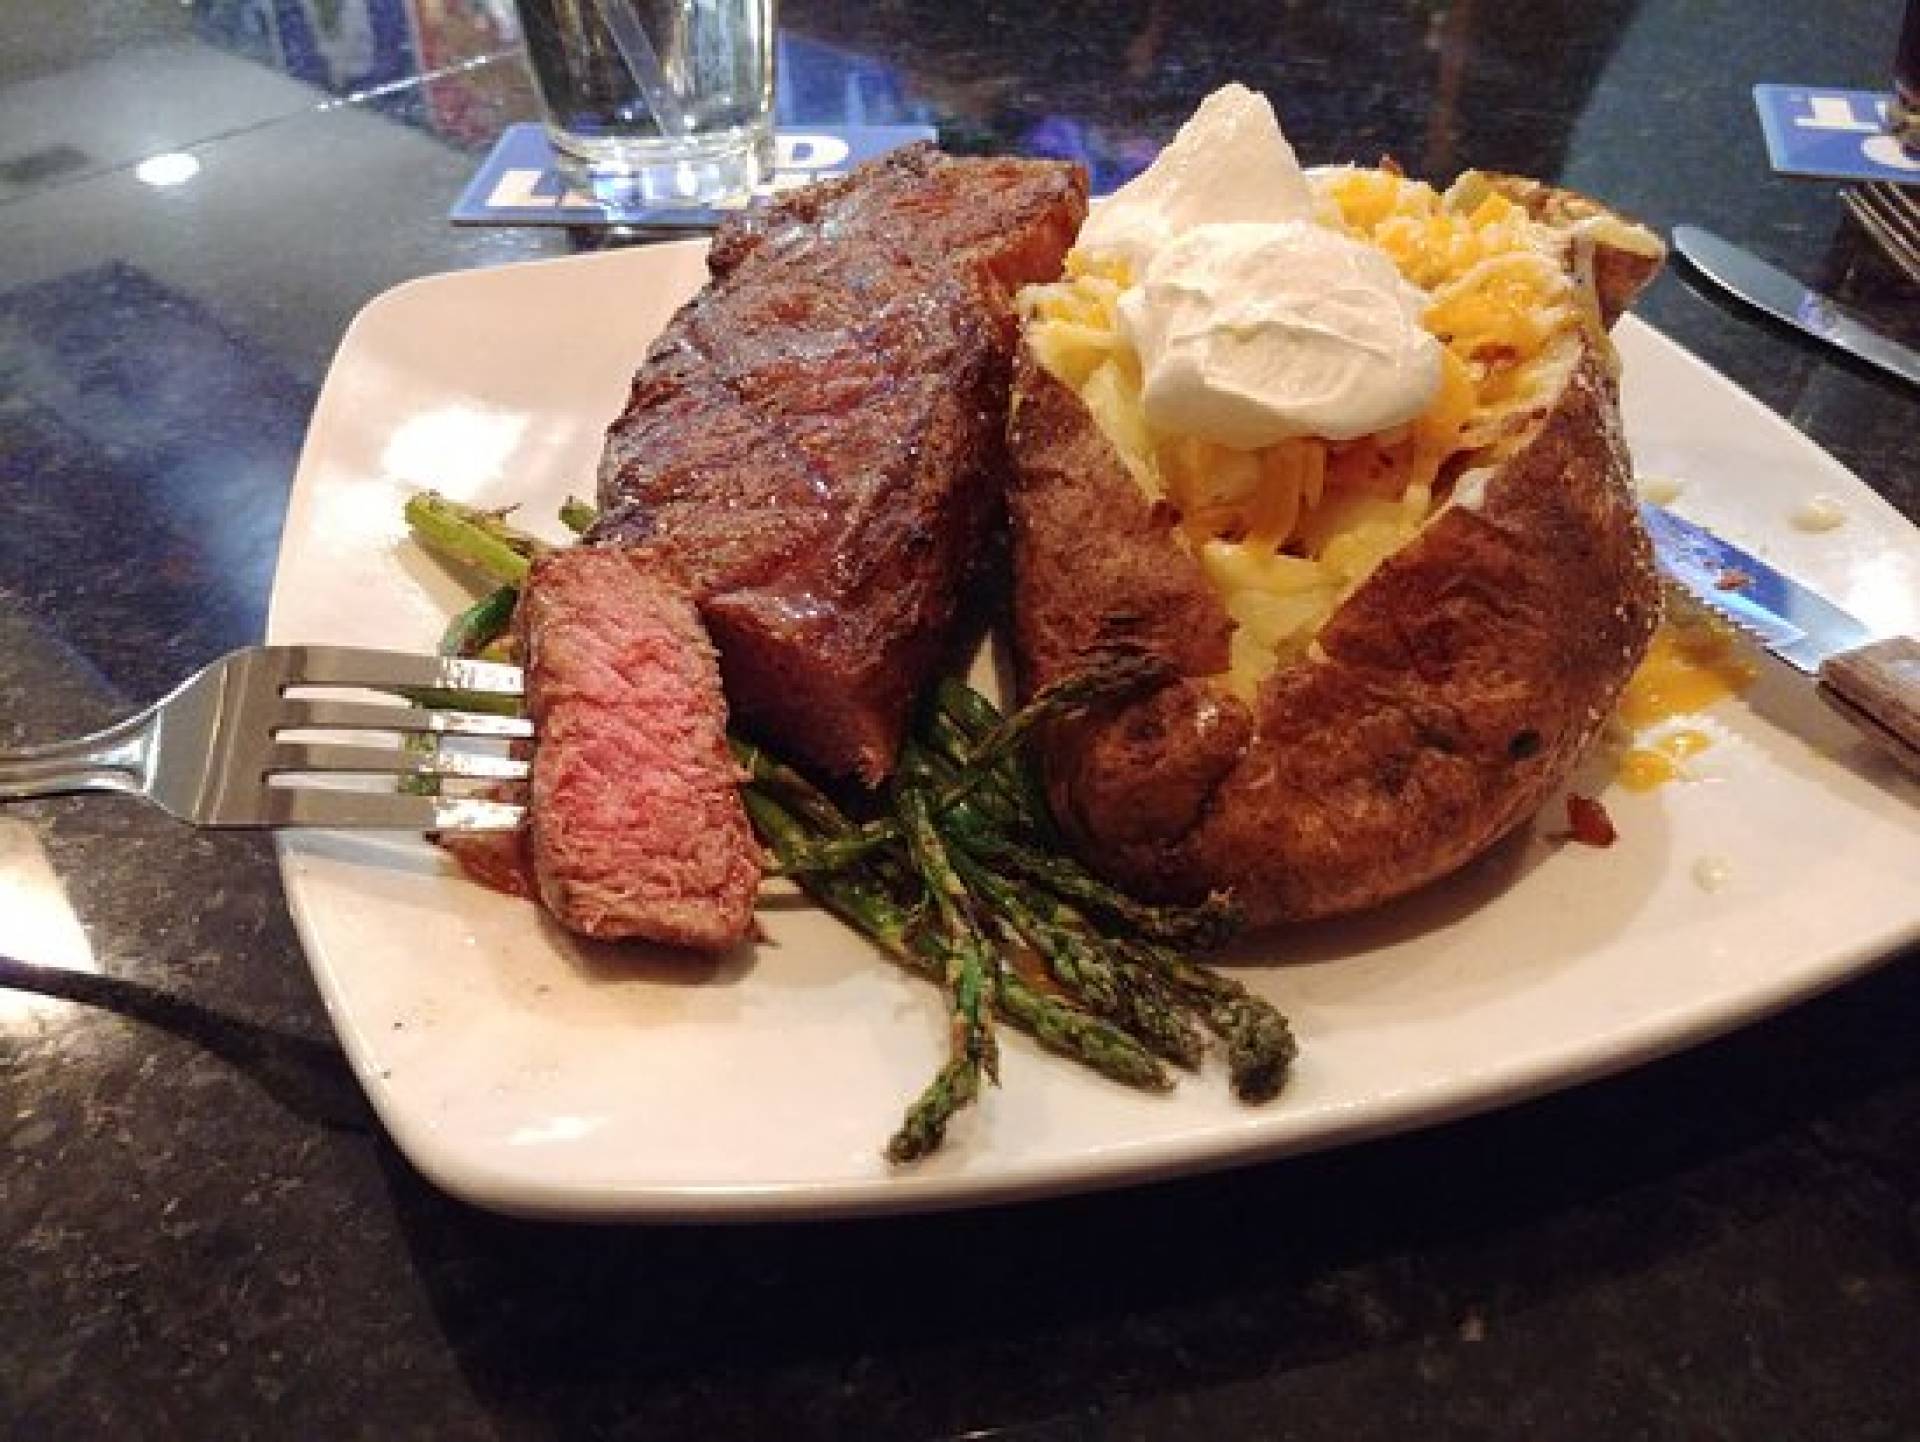 Grilled Steak with Loaded Baked Potato